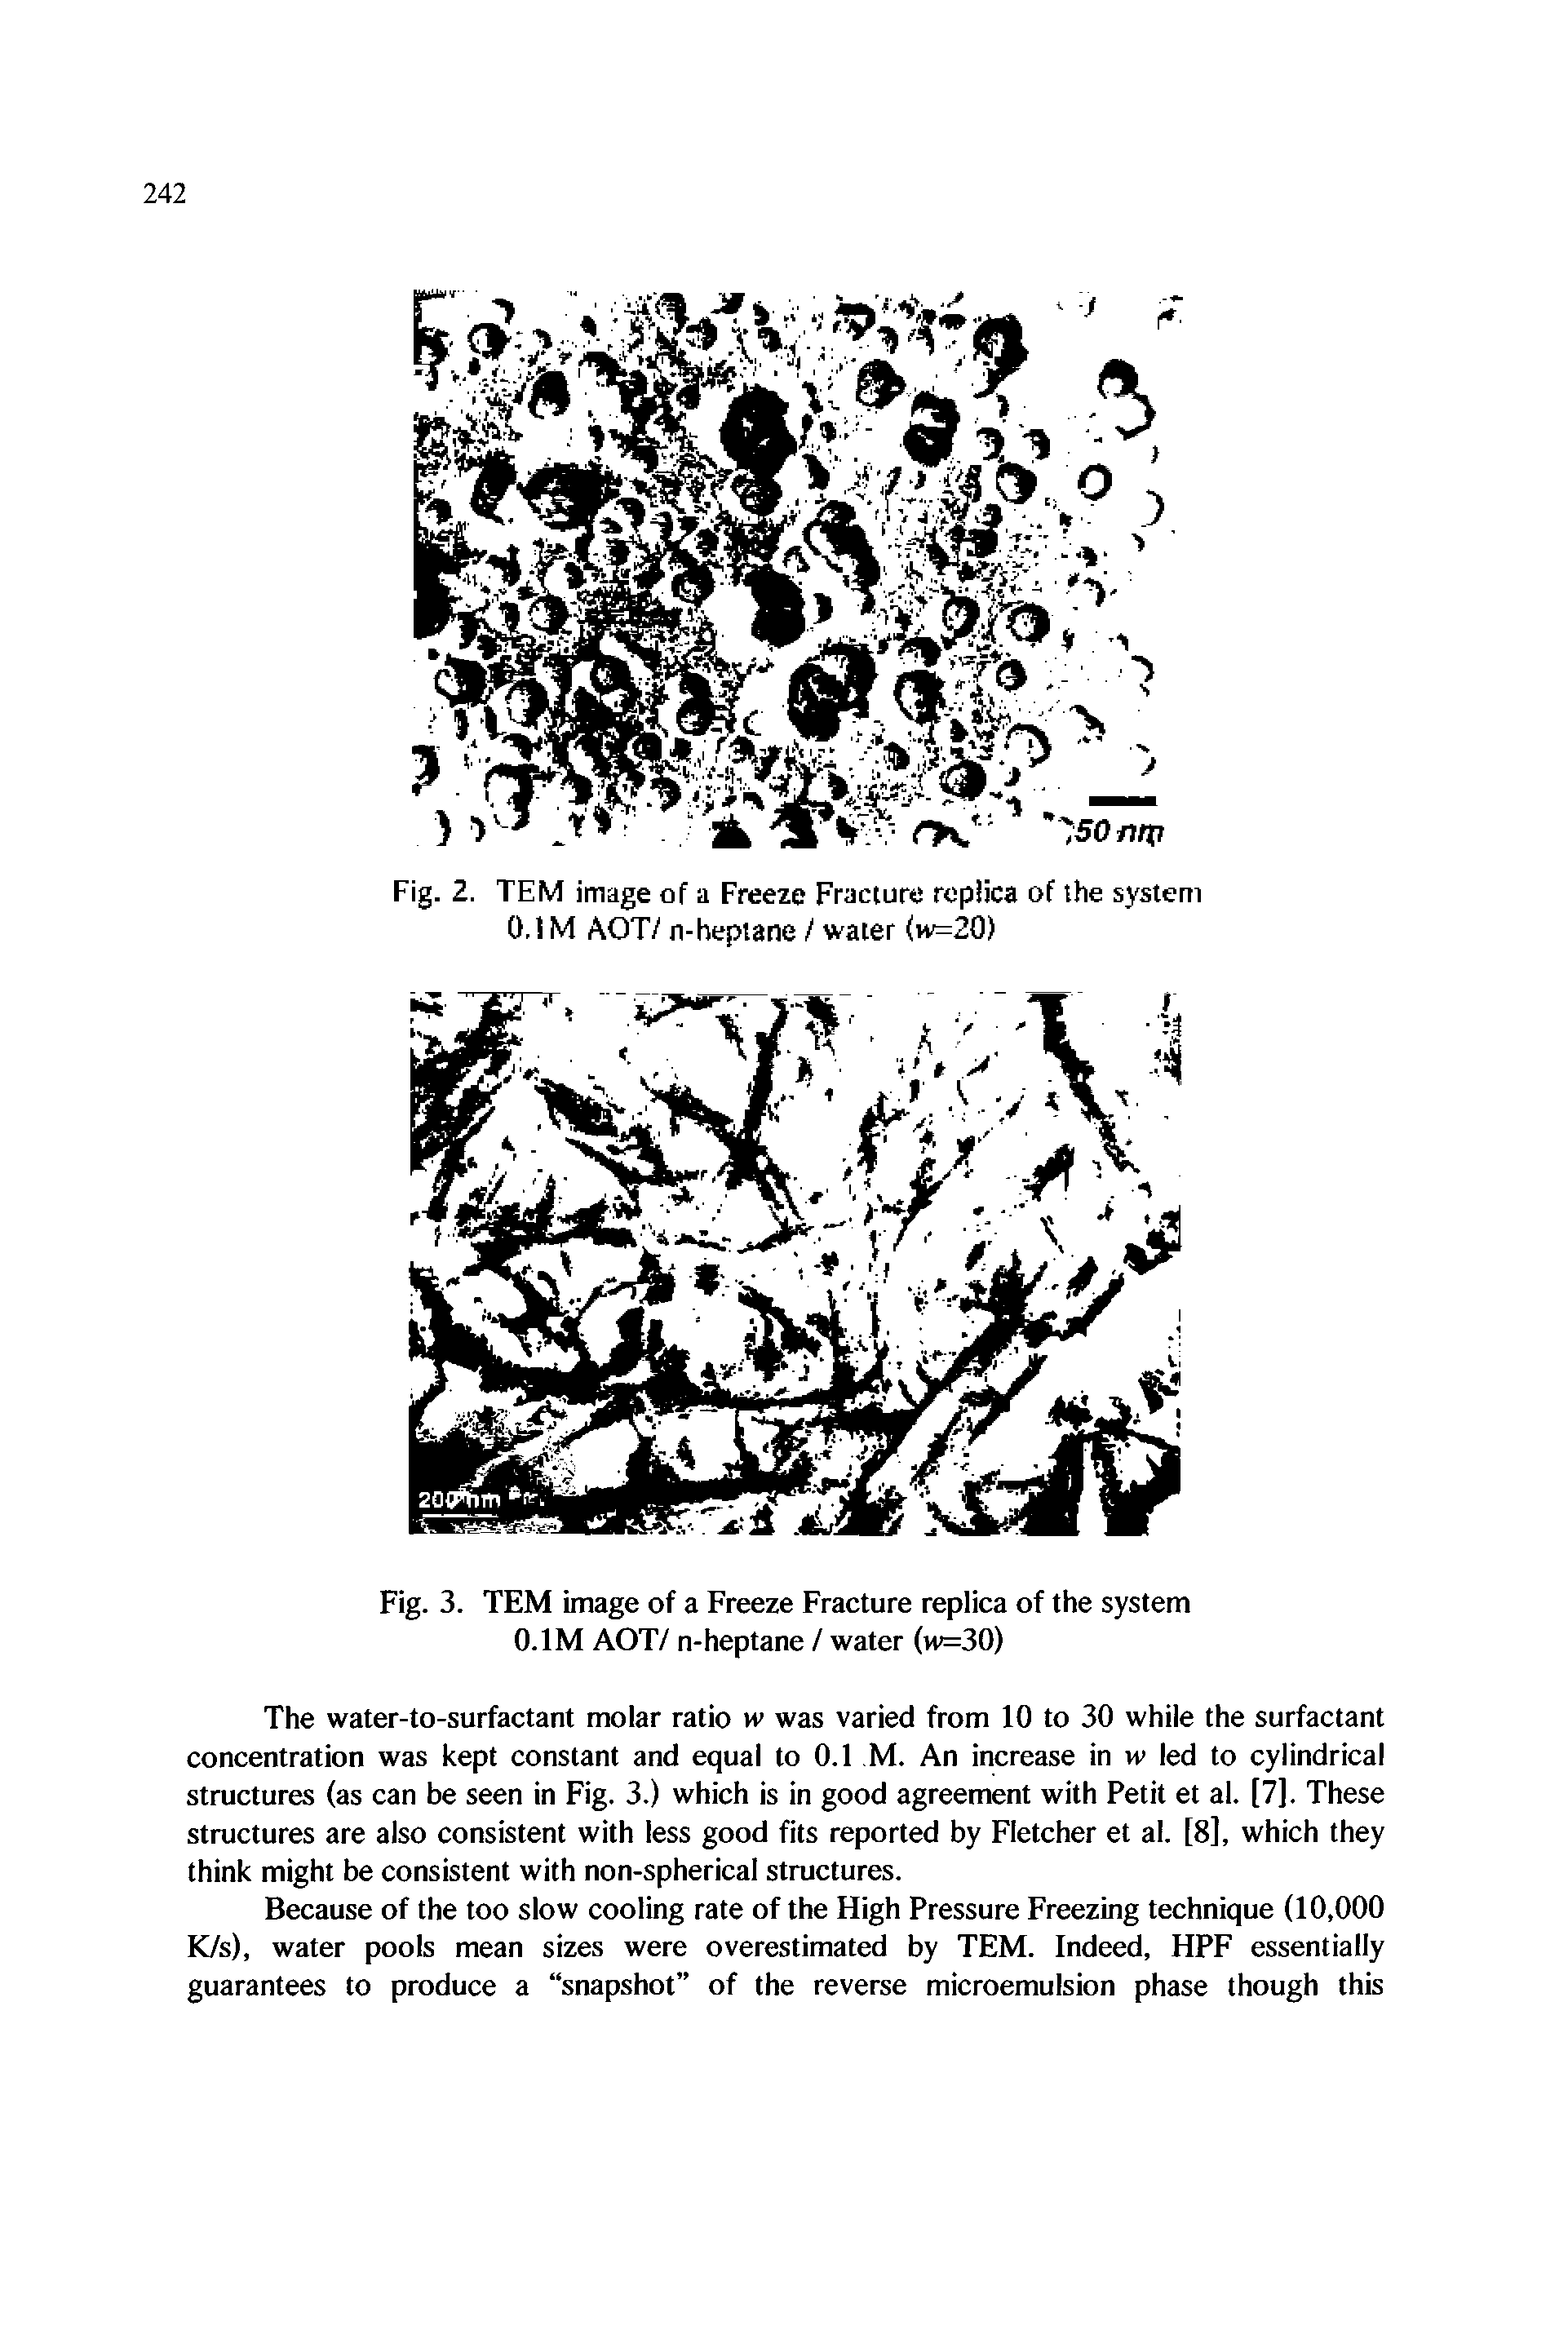 Fig. 2. TEM image of a Freeze Fracture replica of the system O.IM AOT/ n-heptane / water (w=20)...